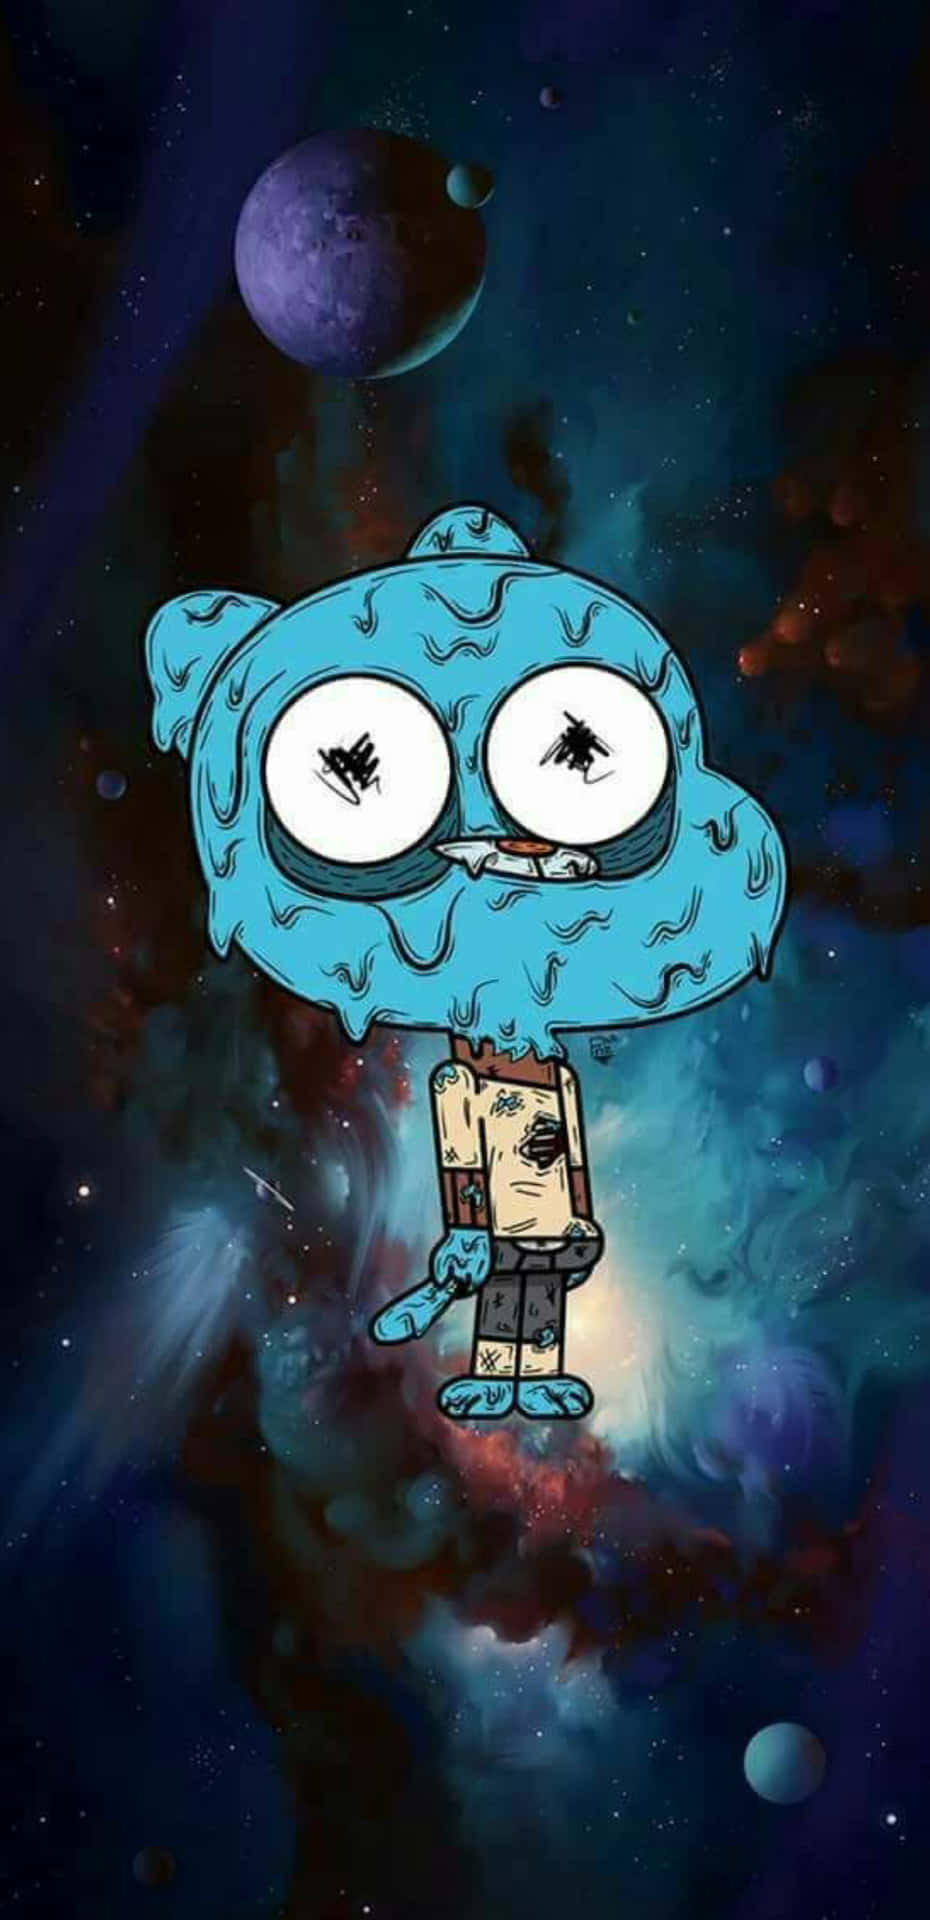 Gumball Watterson and Darwin in a Super Adventure Wallpaper